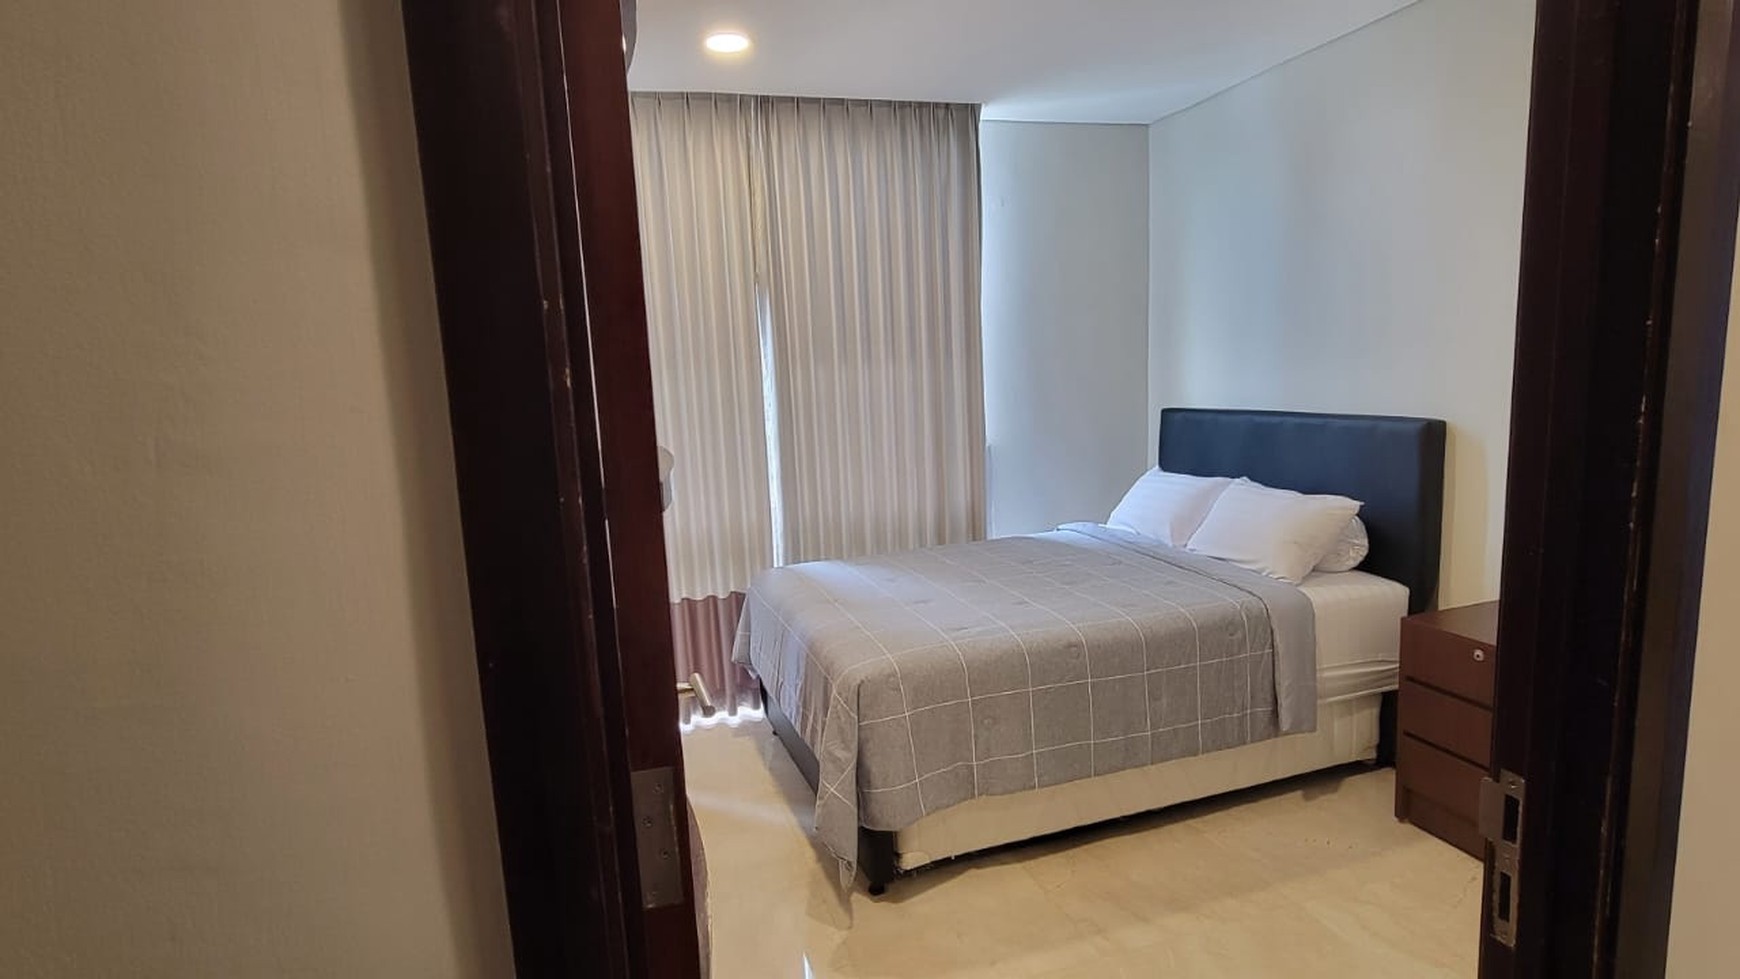 For Rent Apartemen The Empyreal